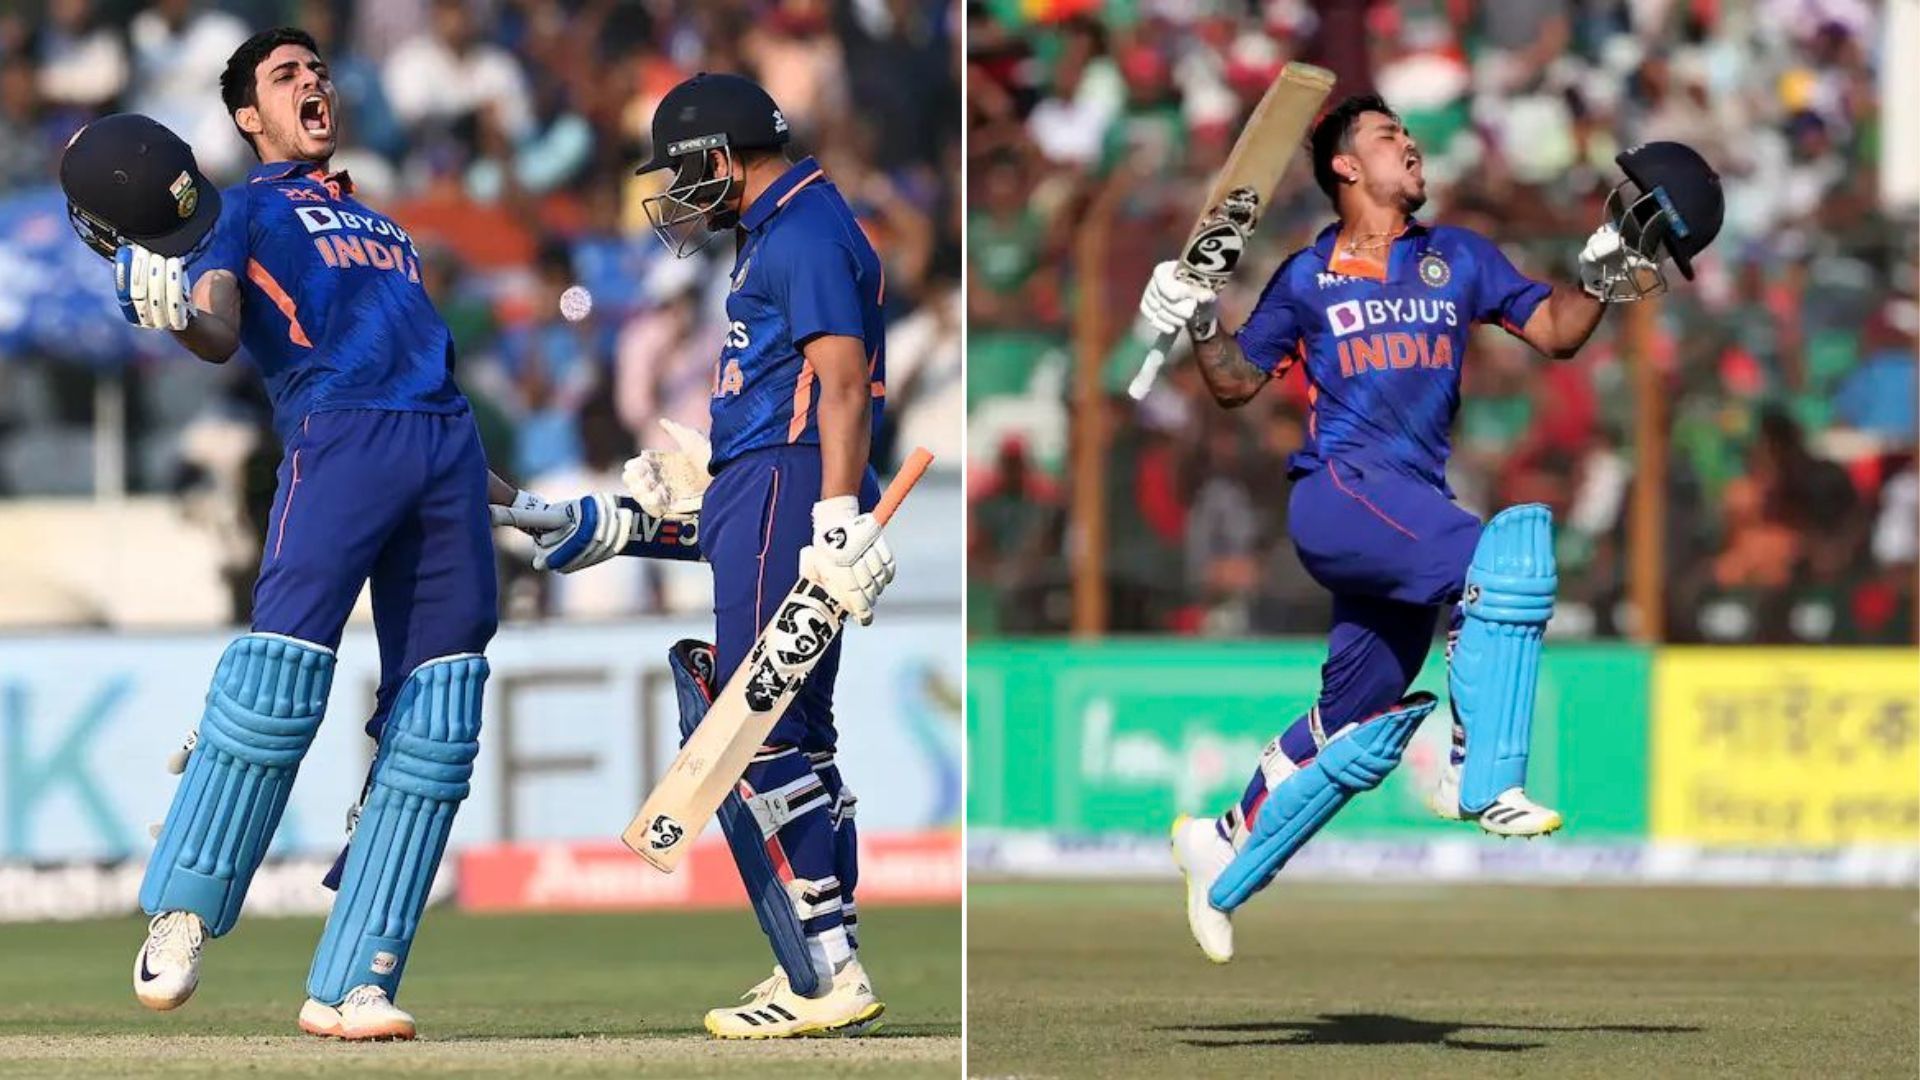 Shubman Gill (L) and Ishan Kishan have both smashed double hundreds for India of late. (P.C.:Twitter)